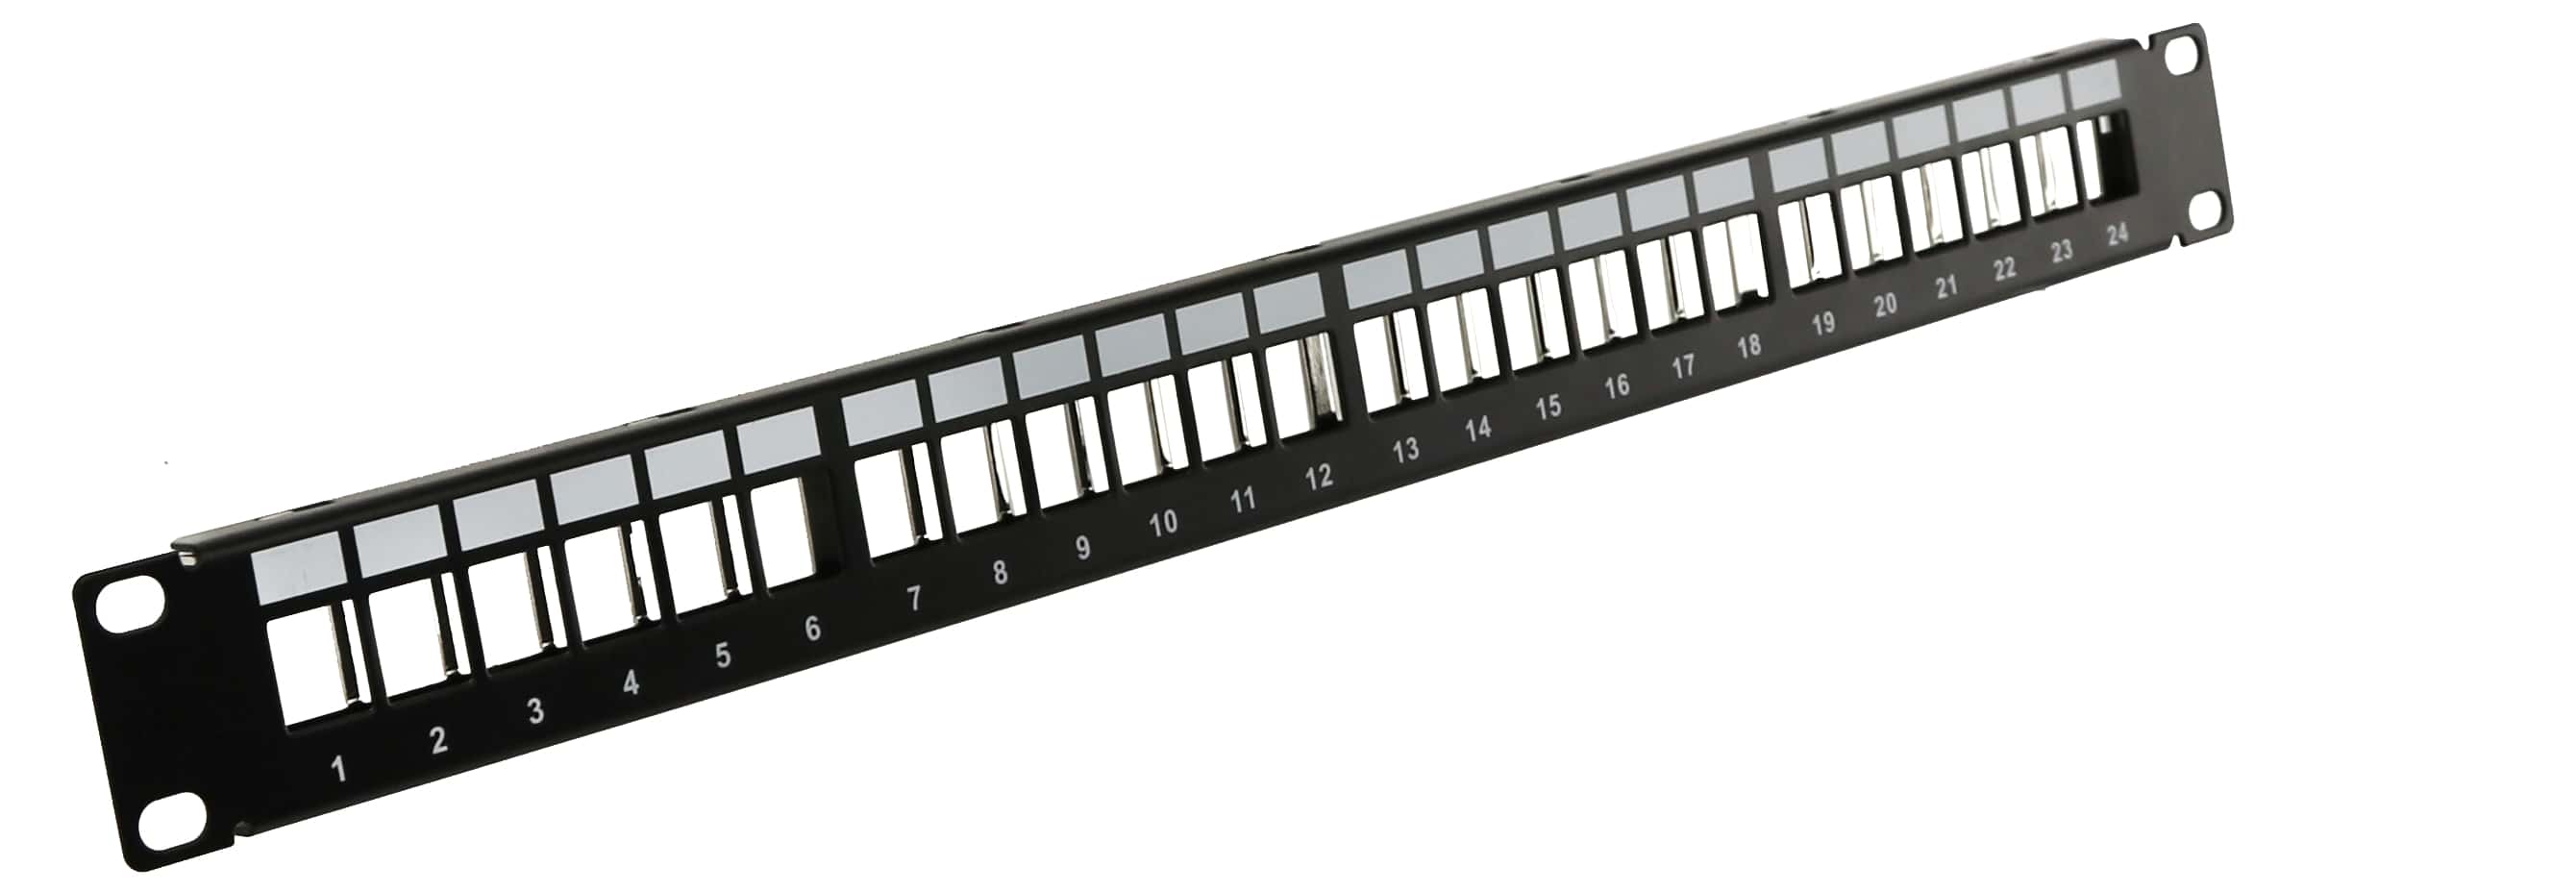 RED4POWER Patchpanel KPP-19-24, 19", 24-port